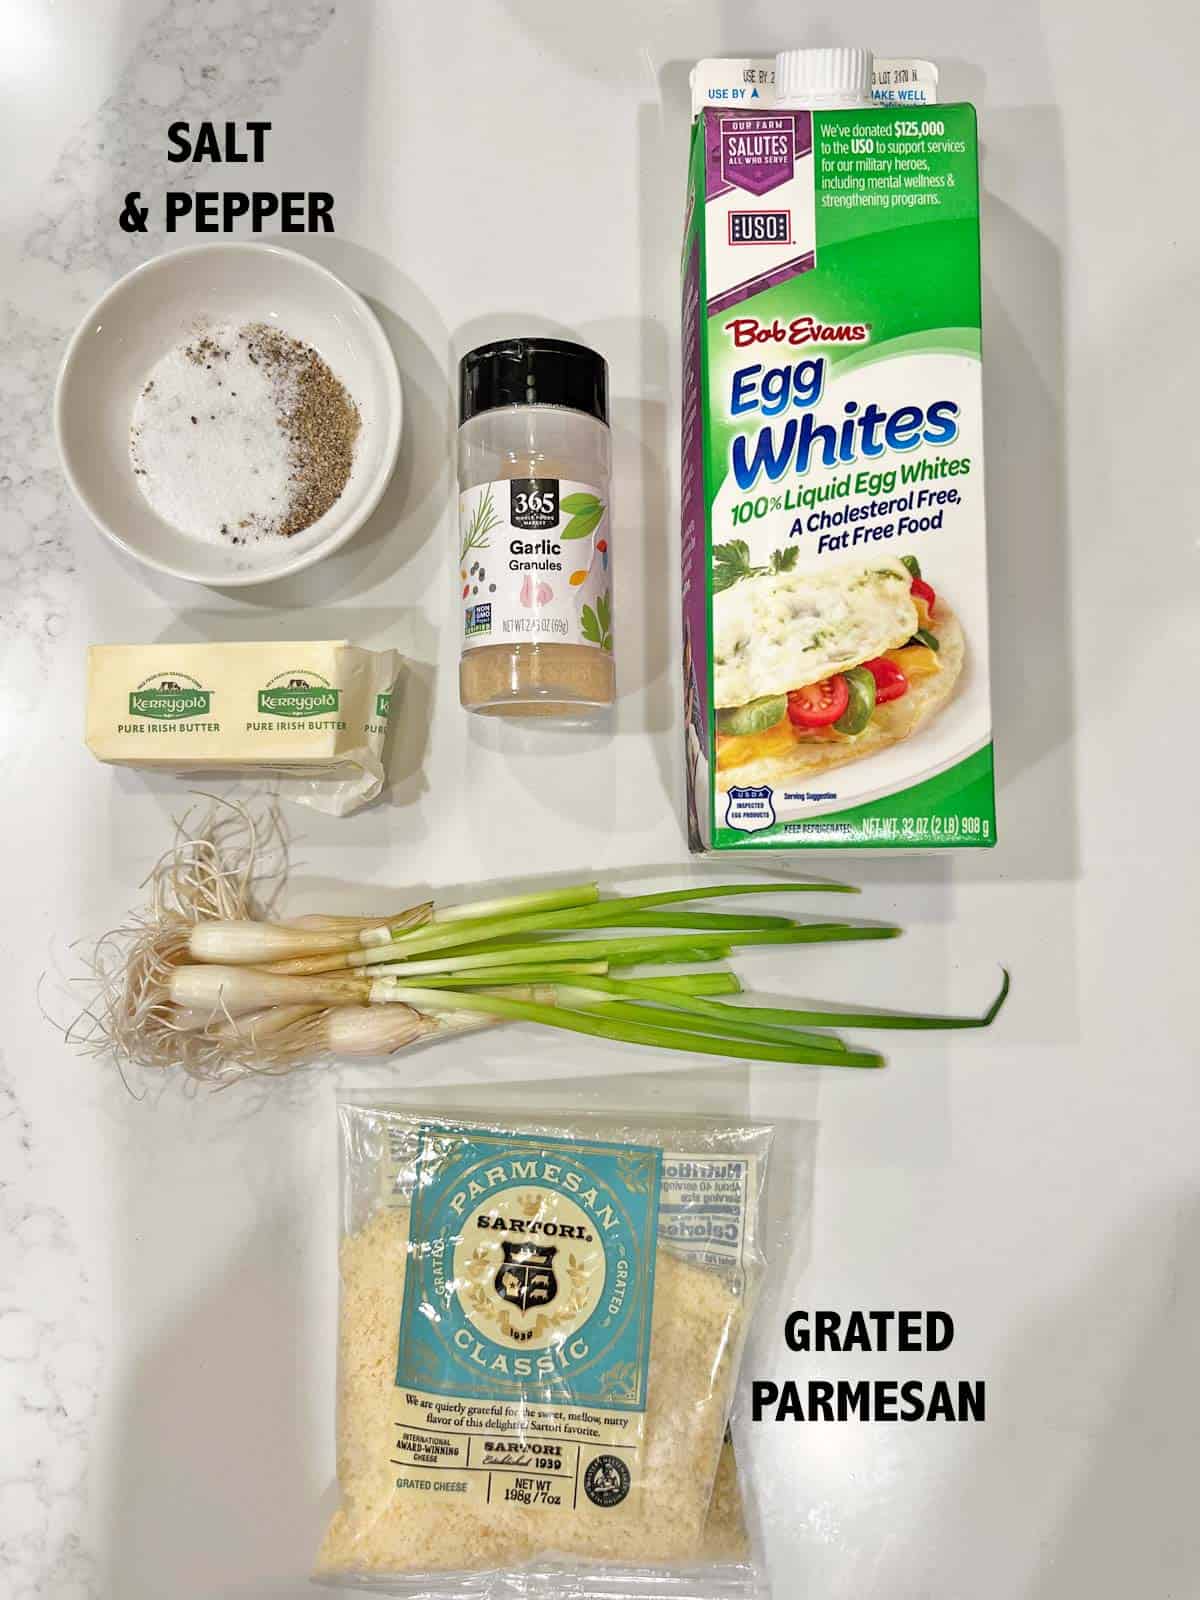 The ingredients needed to make egg white muffins.